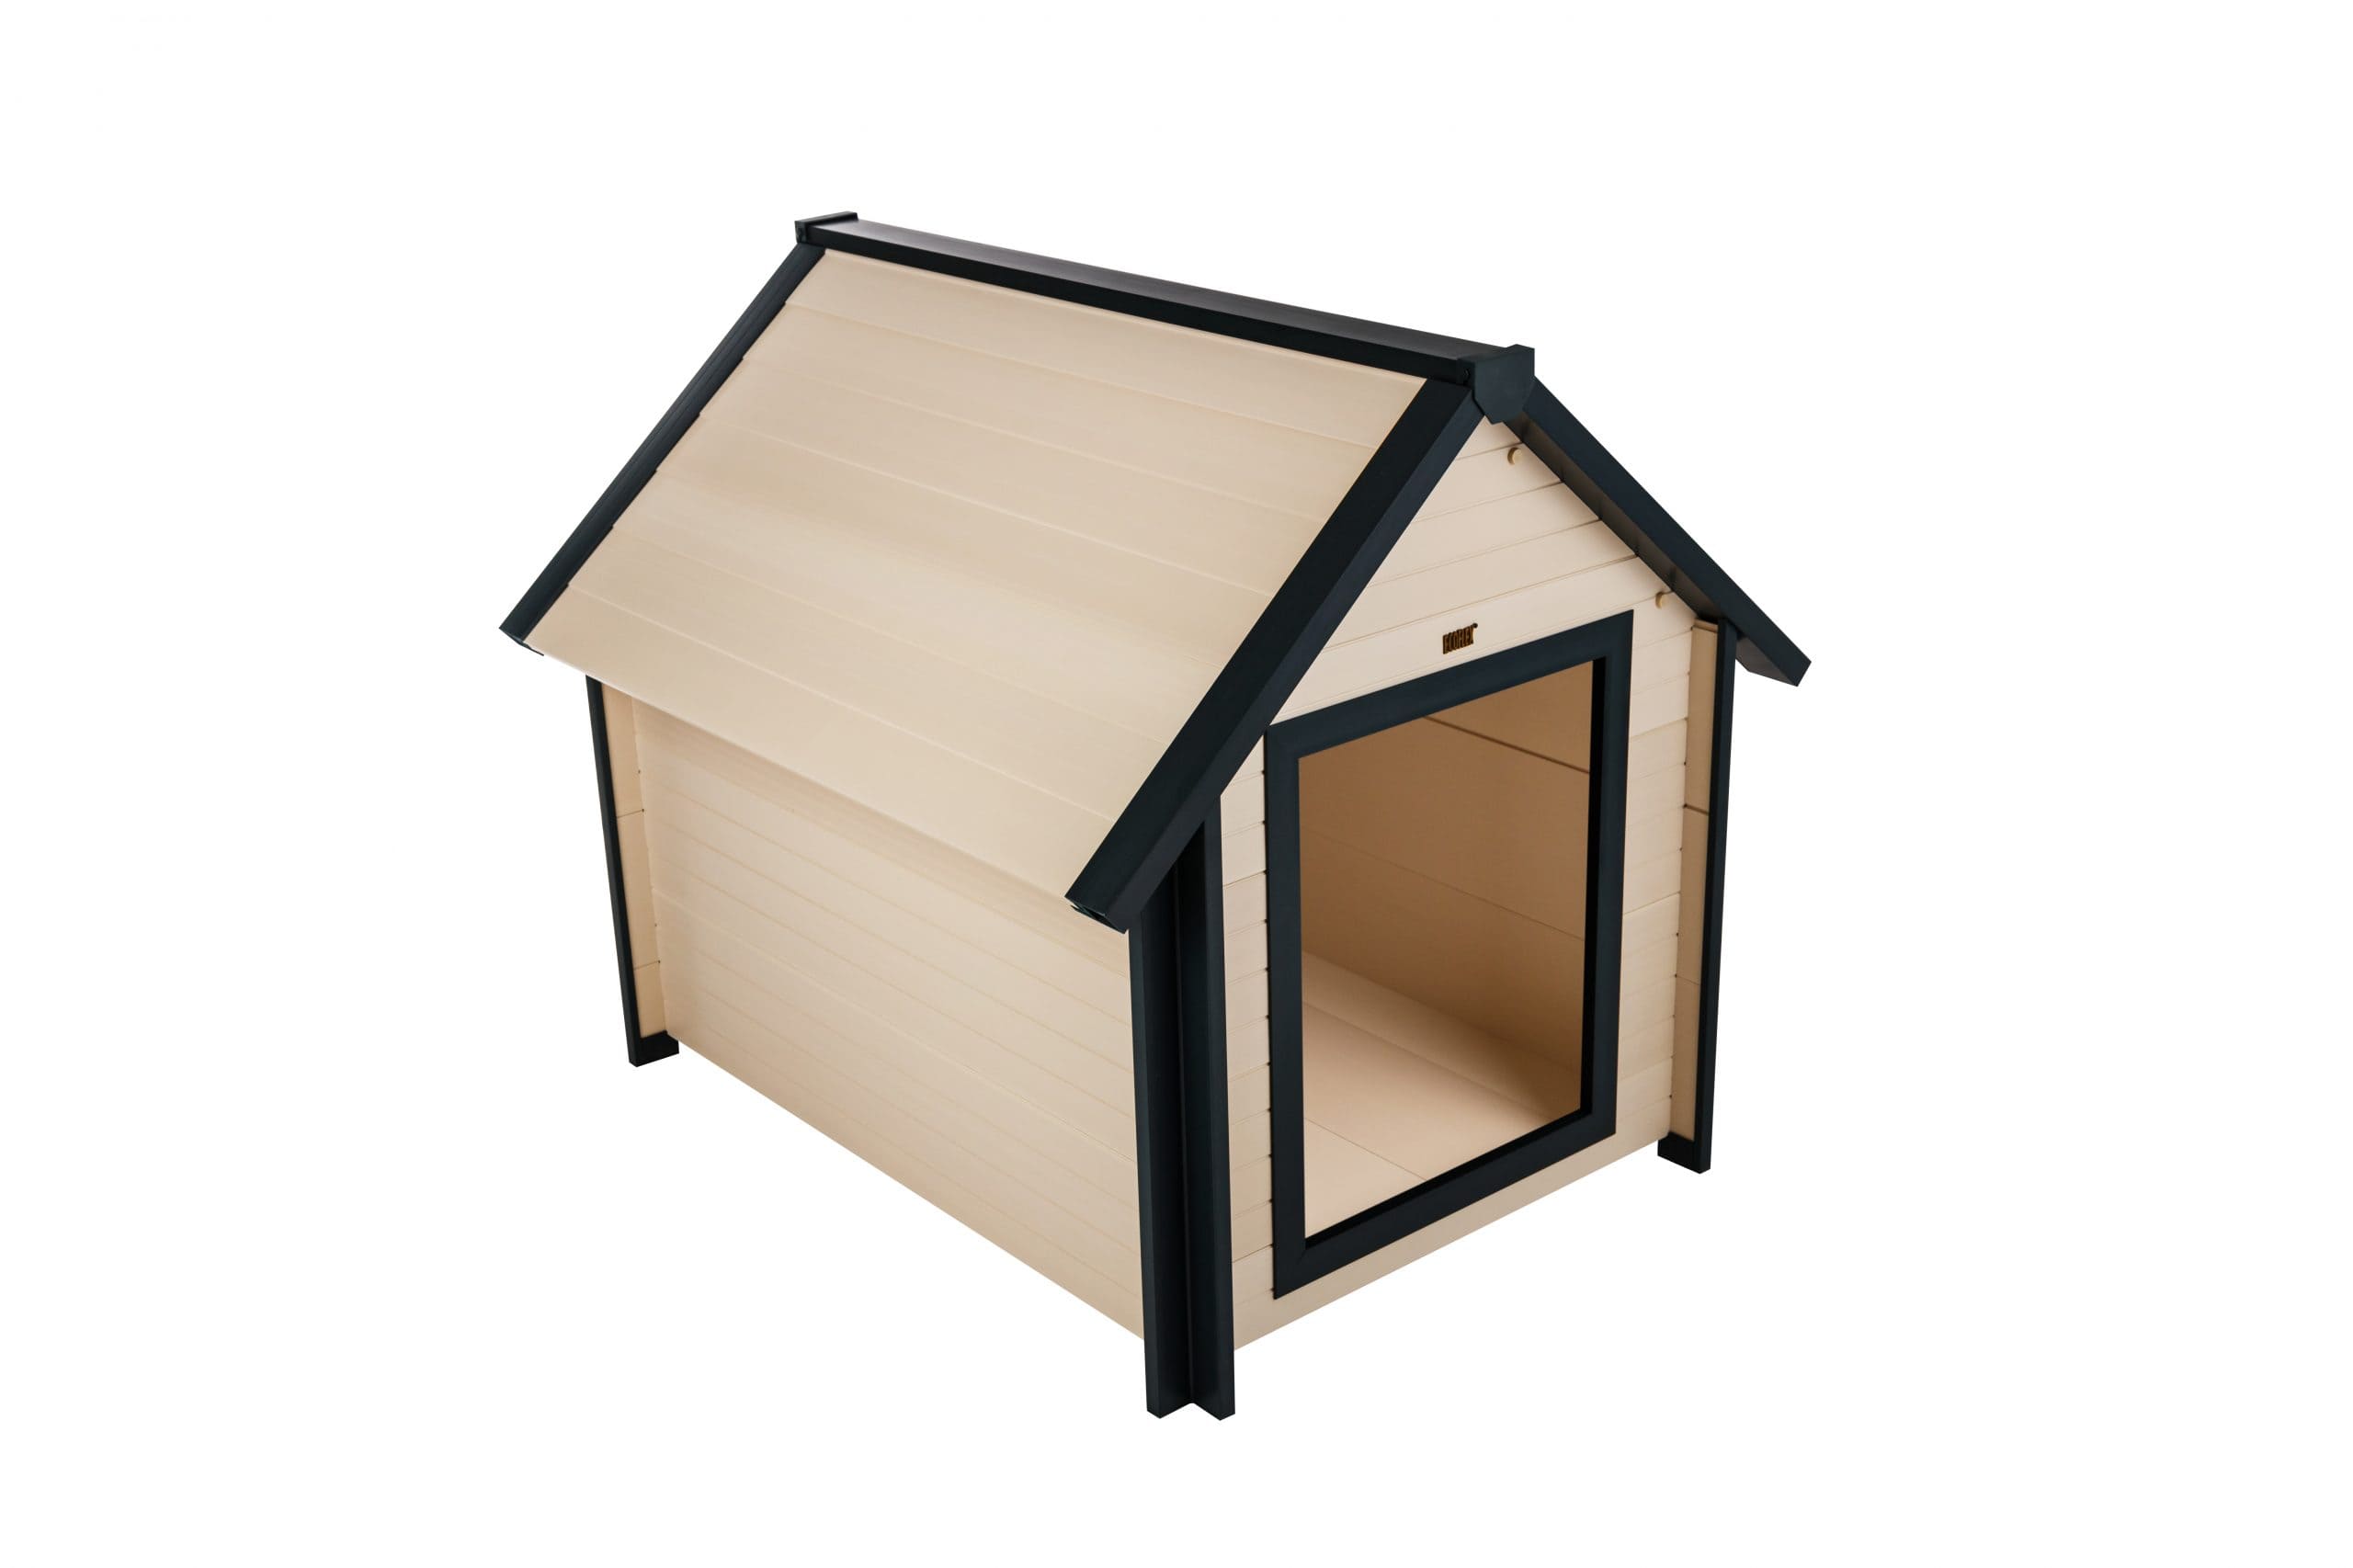 New Age Pet Bunkhouse Dog House Roof Projection